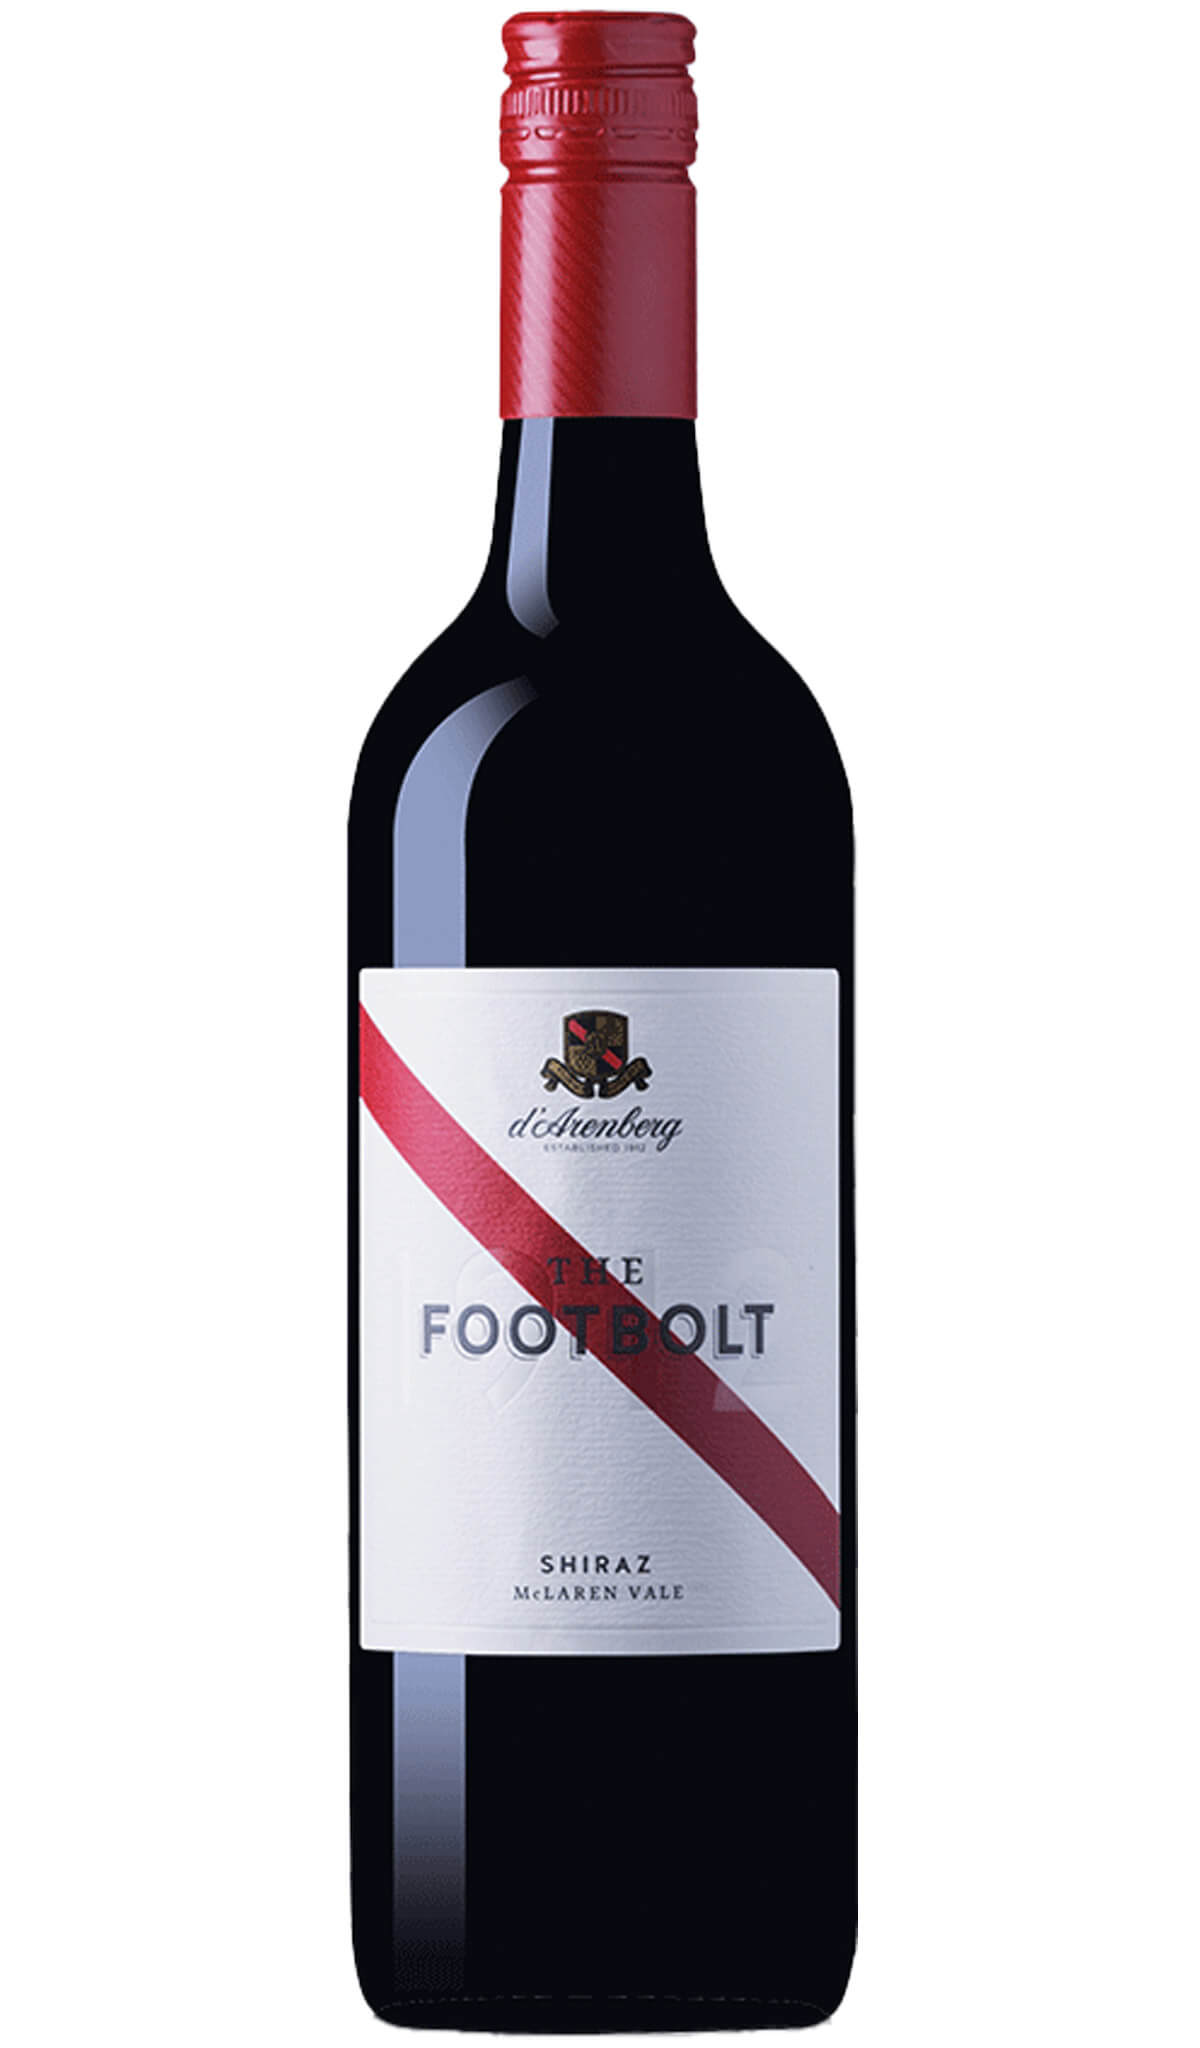 Find out more or buy d'Arenberg The Footbolt Shiraz 2021 (McLaren Vale) online at Wine Sellers Direct - Australia’s independent liquor specialists.